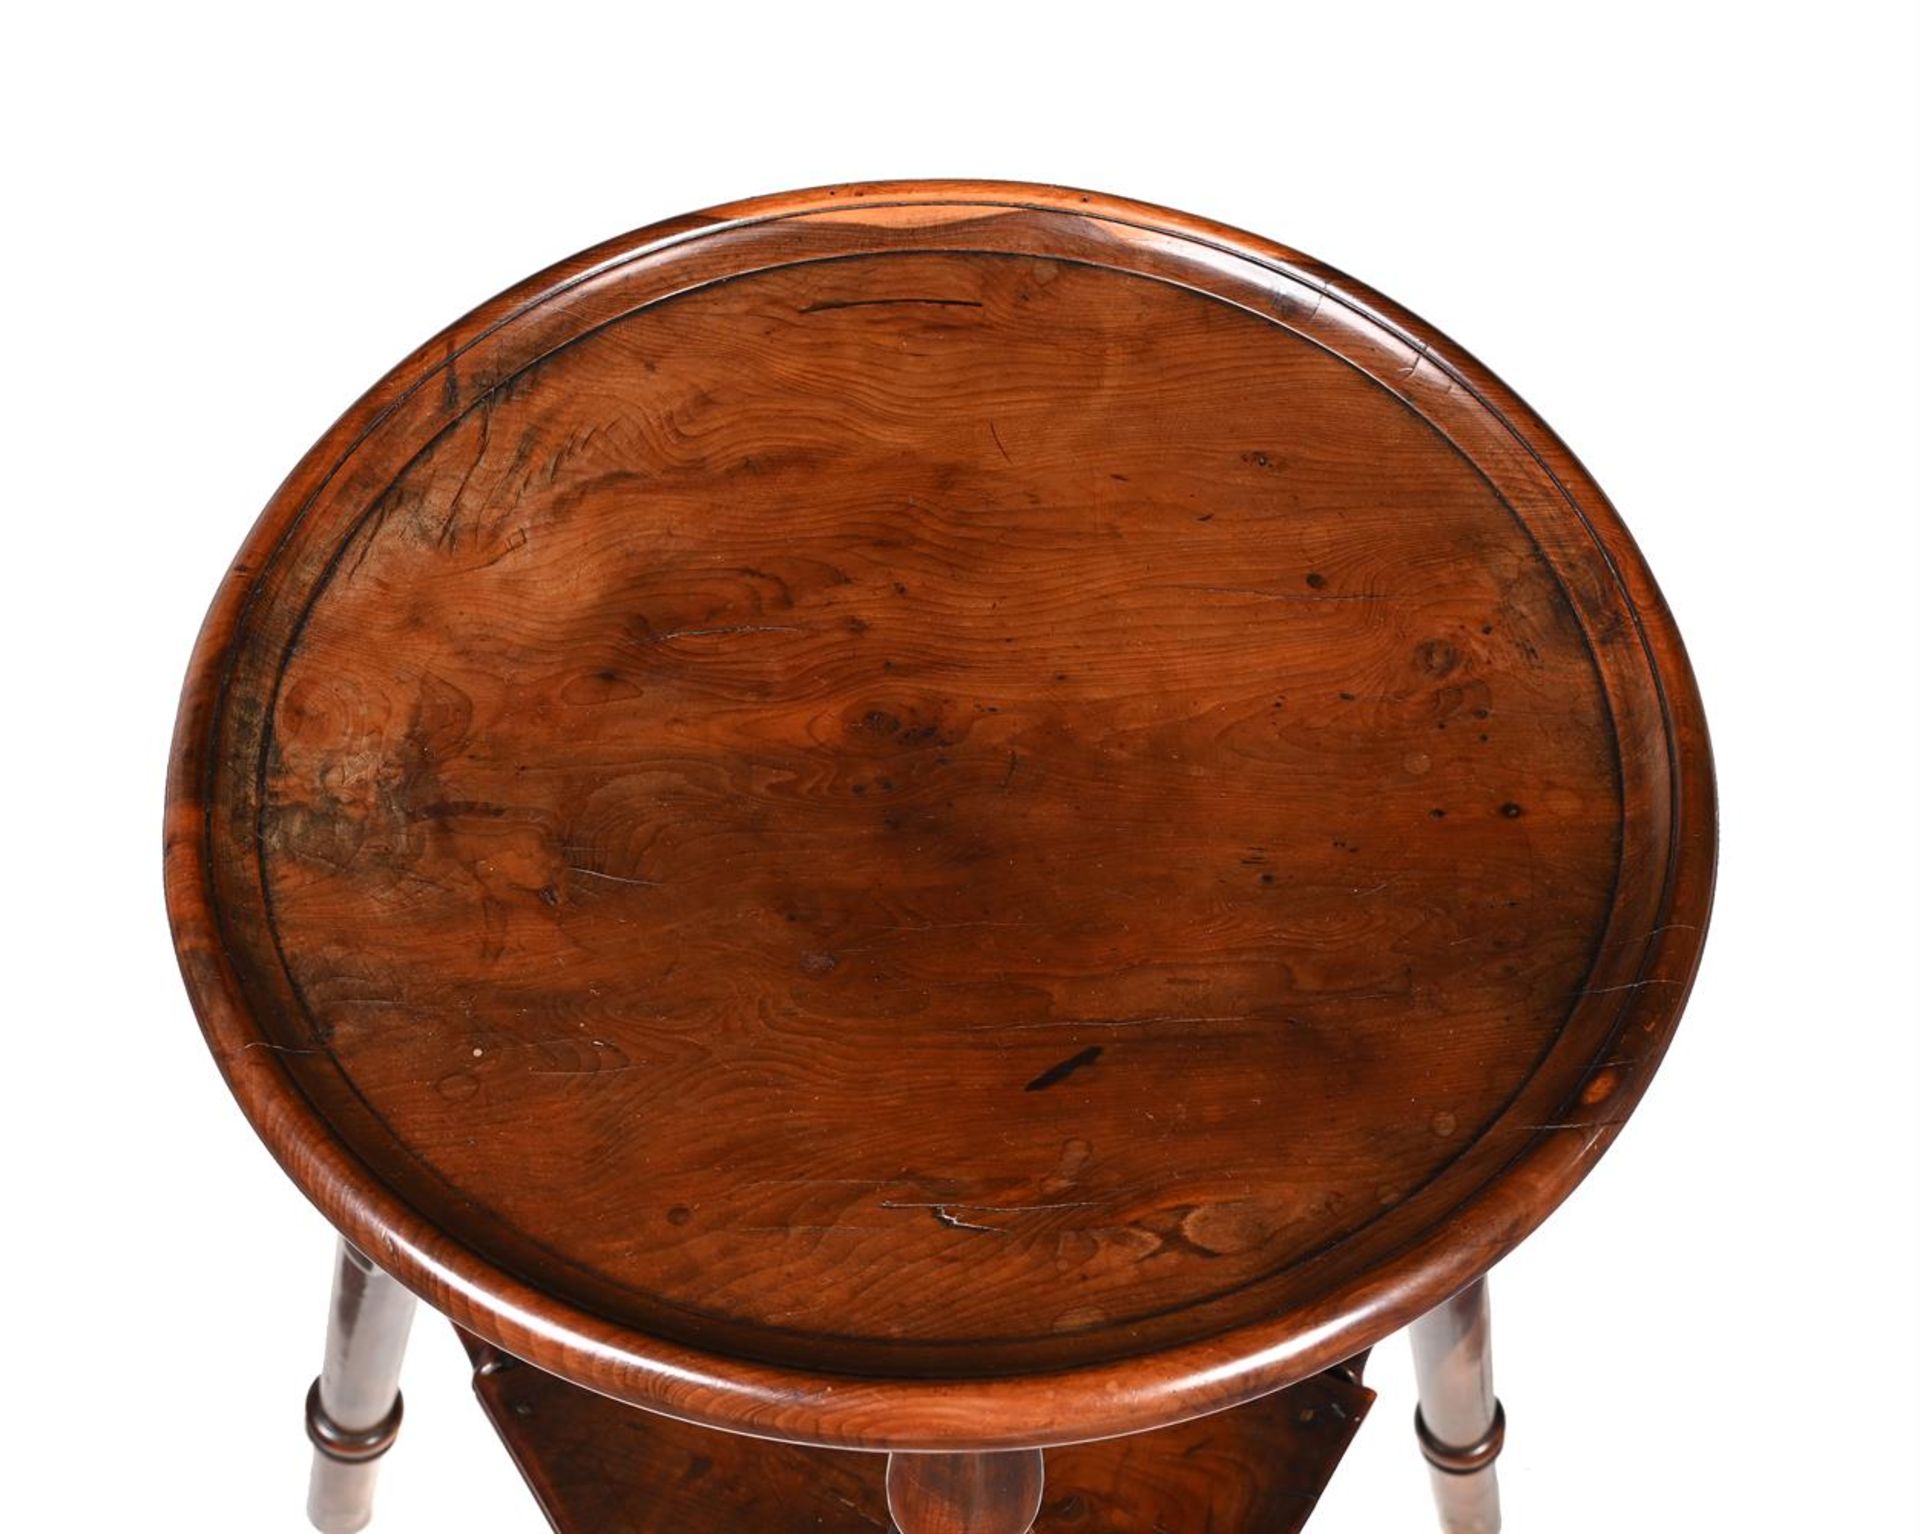 A SOLID YEW WOOD CRICKET TABLE, EARLY 19TH CENTURY - Image 3 of 3